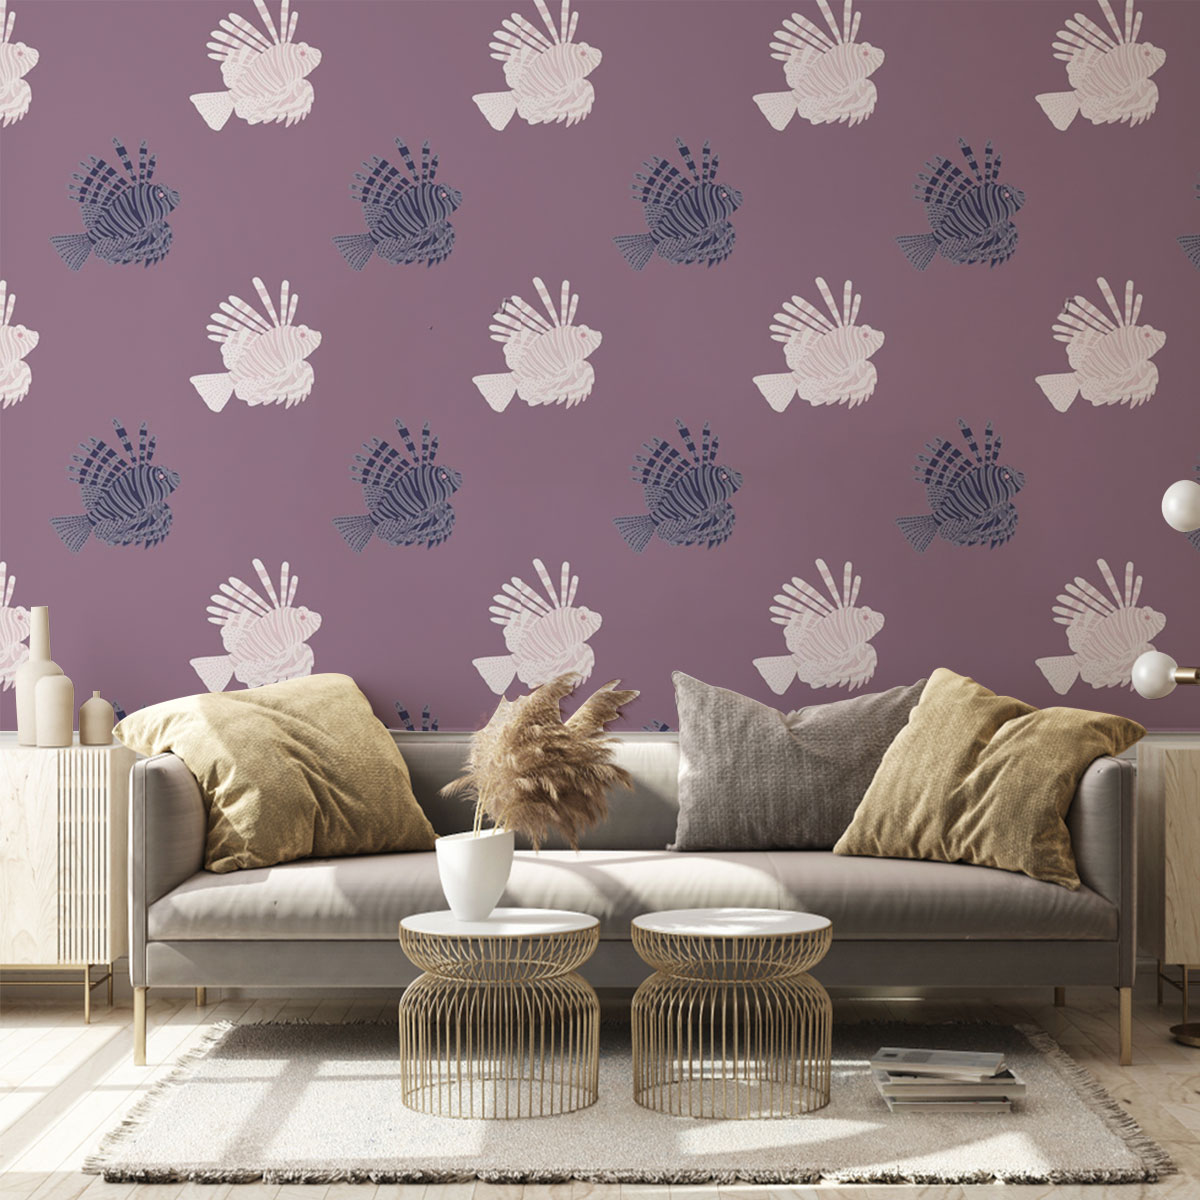 Black And White Lionfish Wall Mural